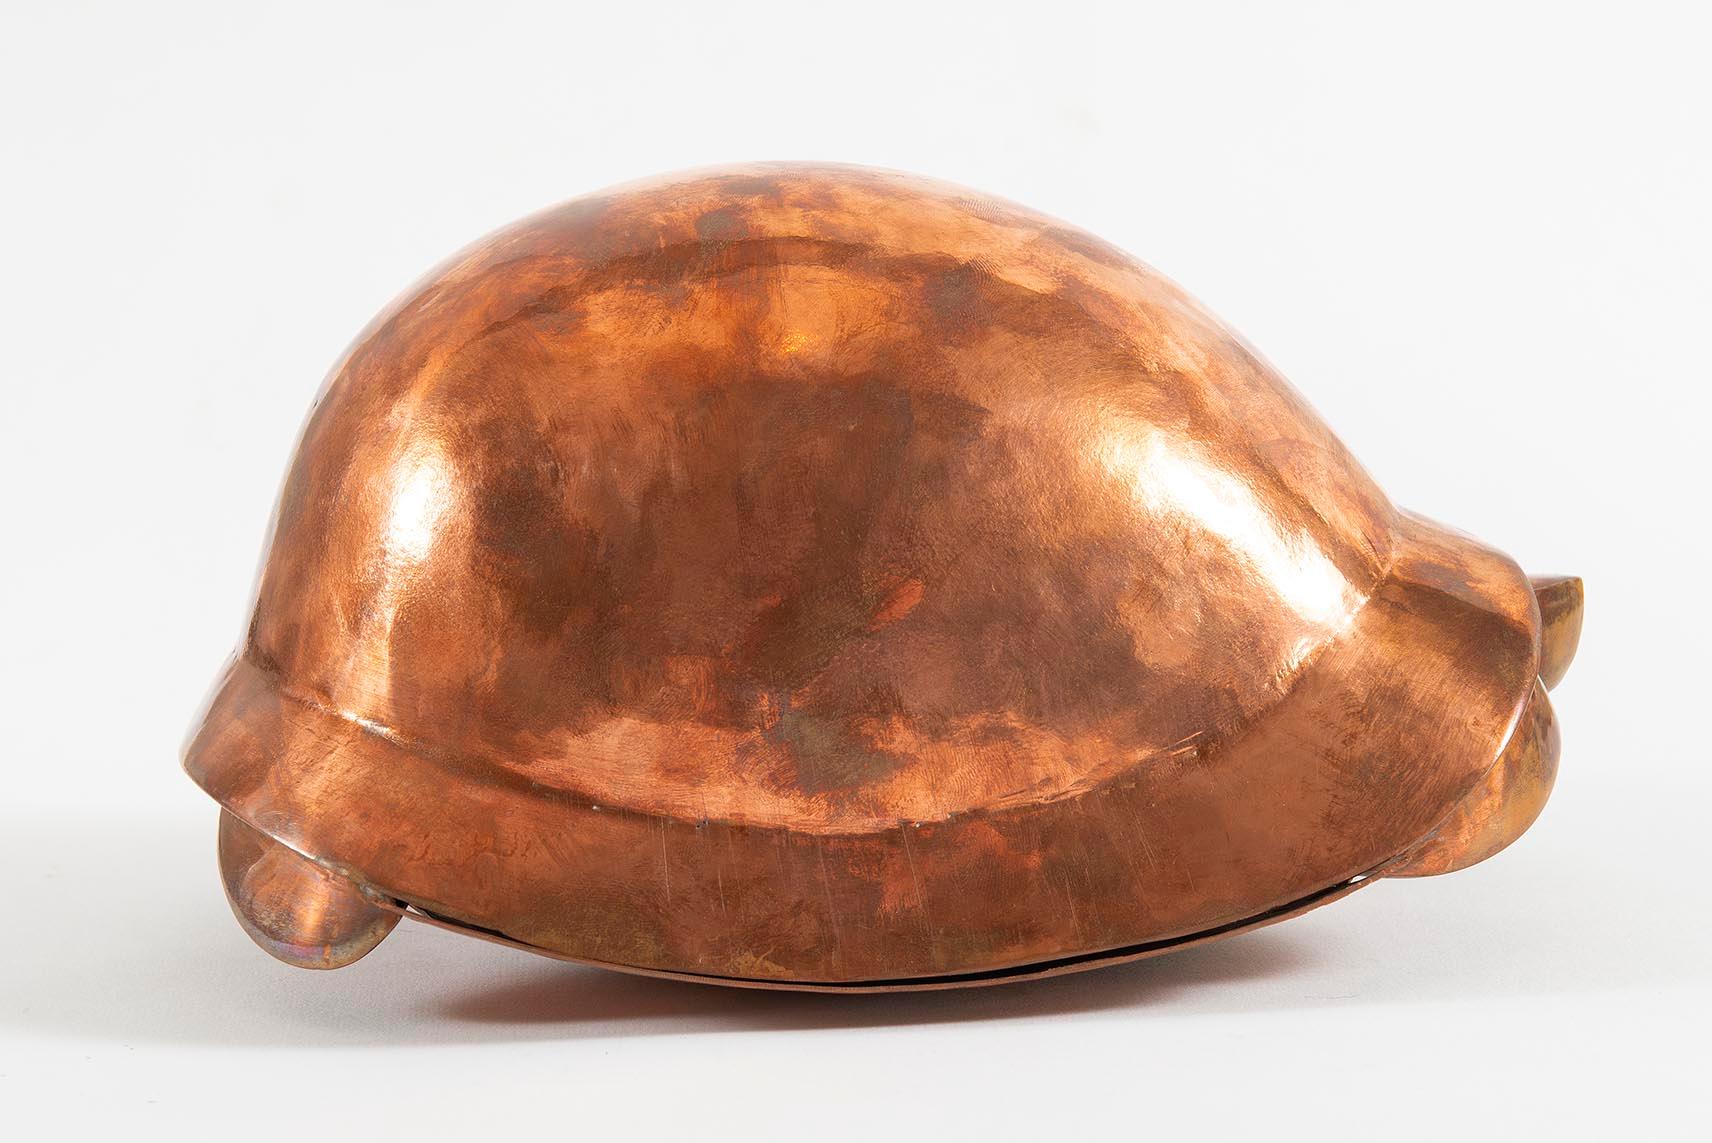 Tortue
Ed. 26/100 pcs
1973
Copper
15 x 25 x 19 cm
Monogrammed and numbered underside :  73, FXL, 26/100

Private collection, Belgium (Gift from Mrs Hergé)